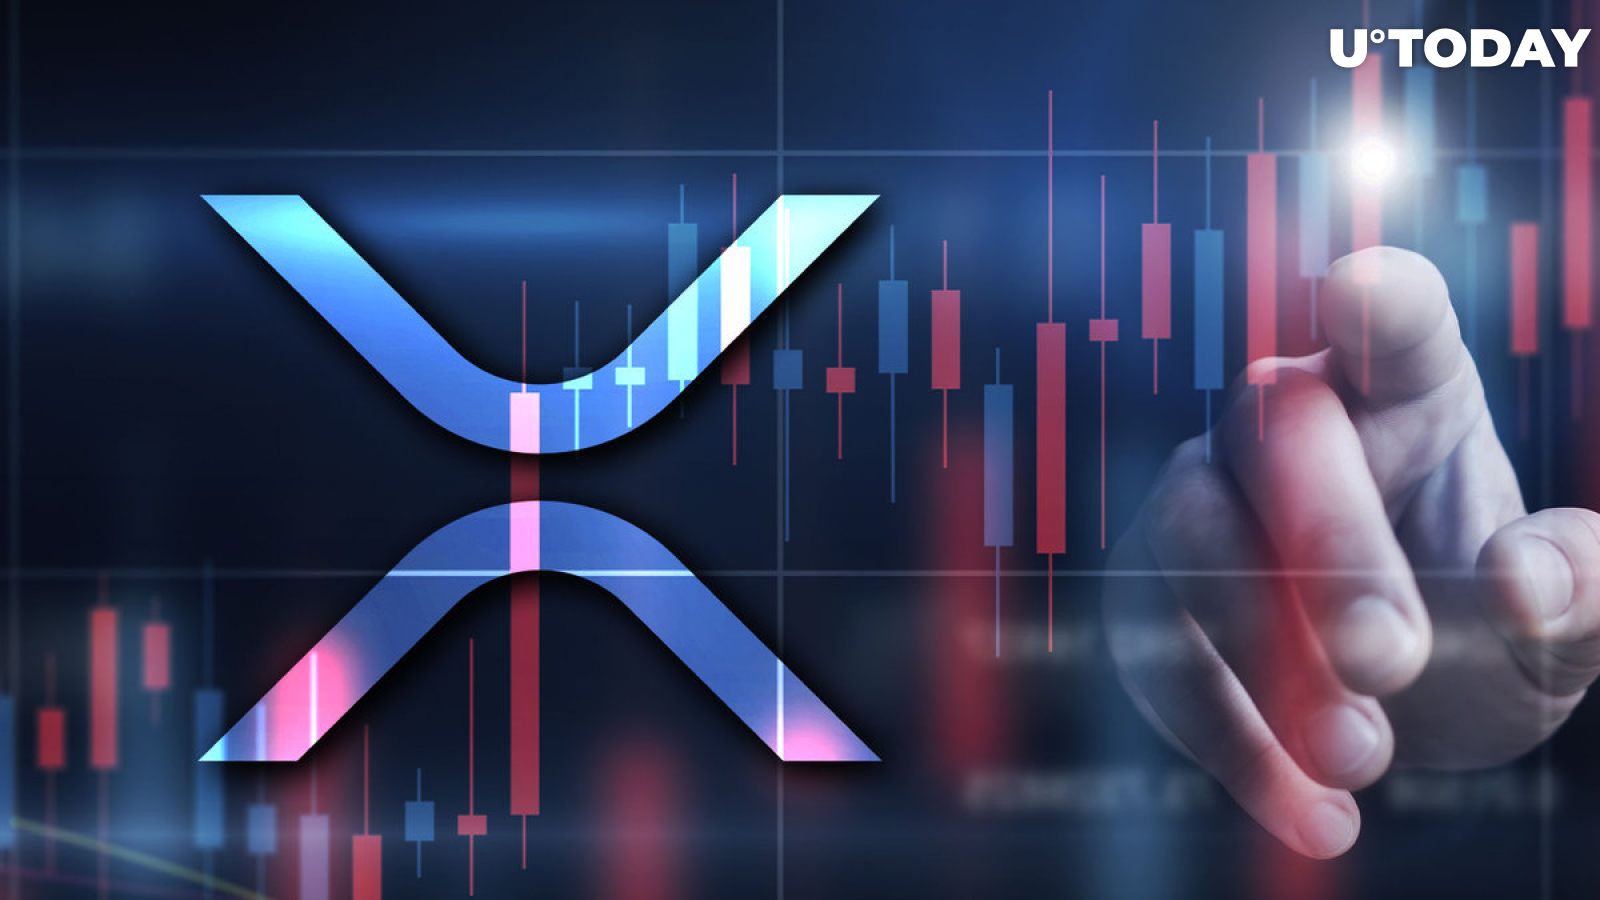 XRP Hits Massive Milestone That Explains Current Market Rally, Here's What's Happening